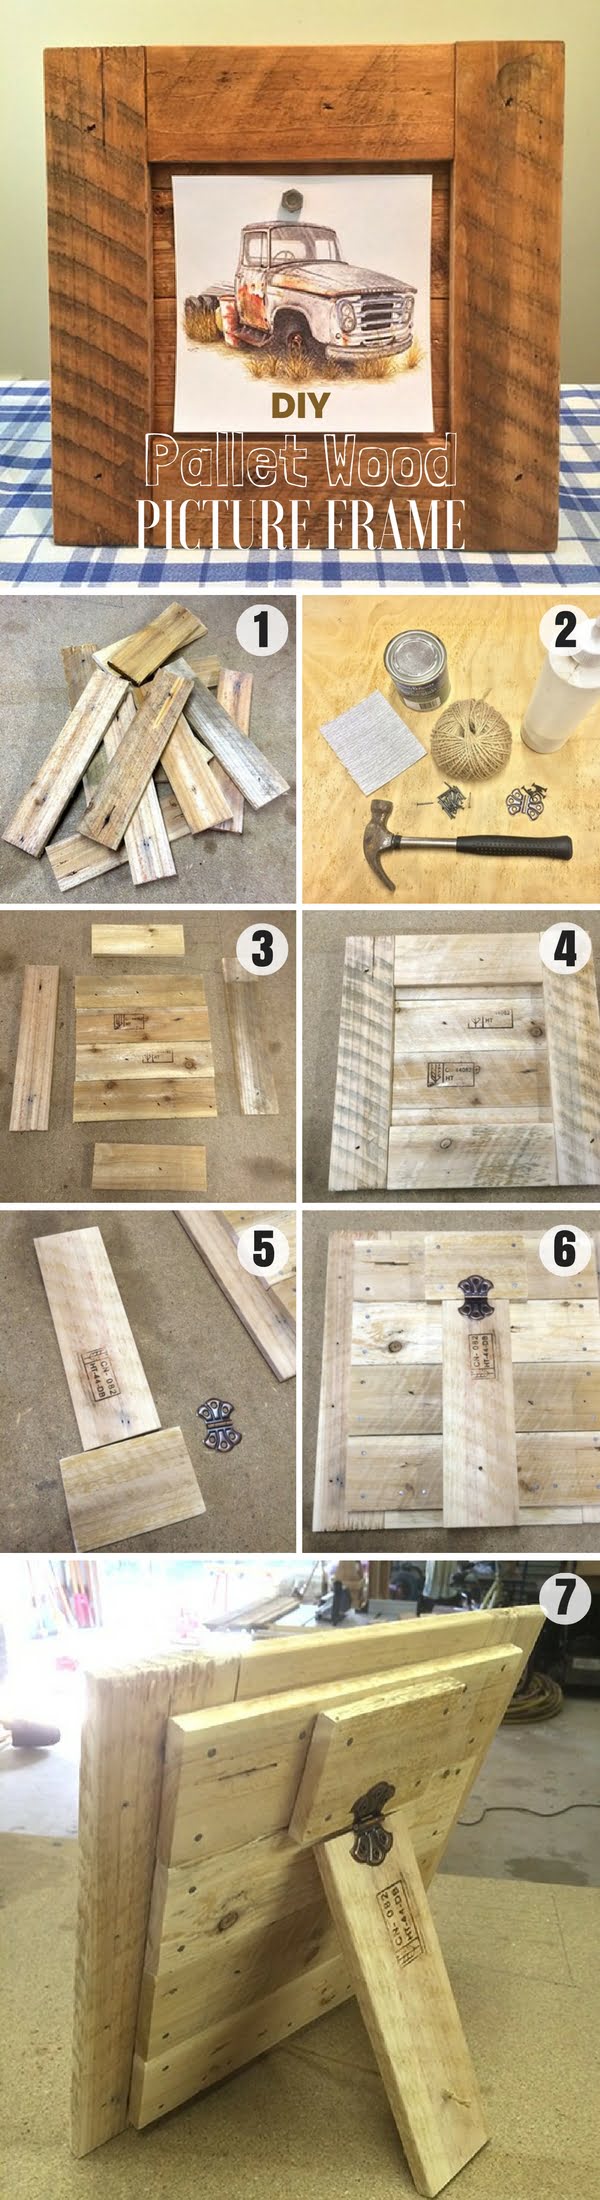 Check out how to make an easy DIY Pallet Wood Picture Frame